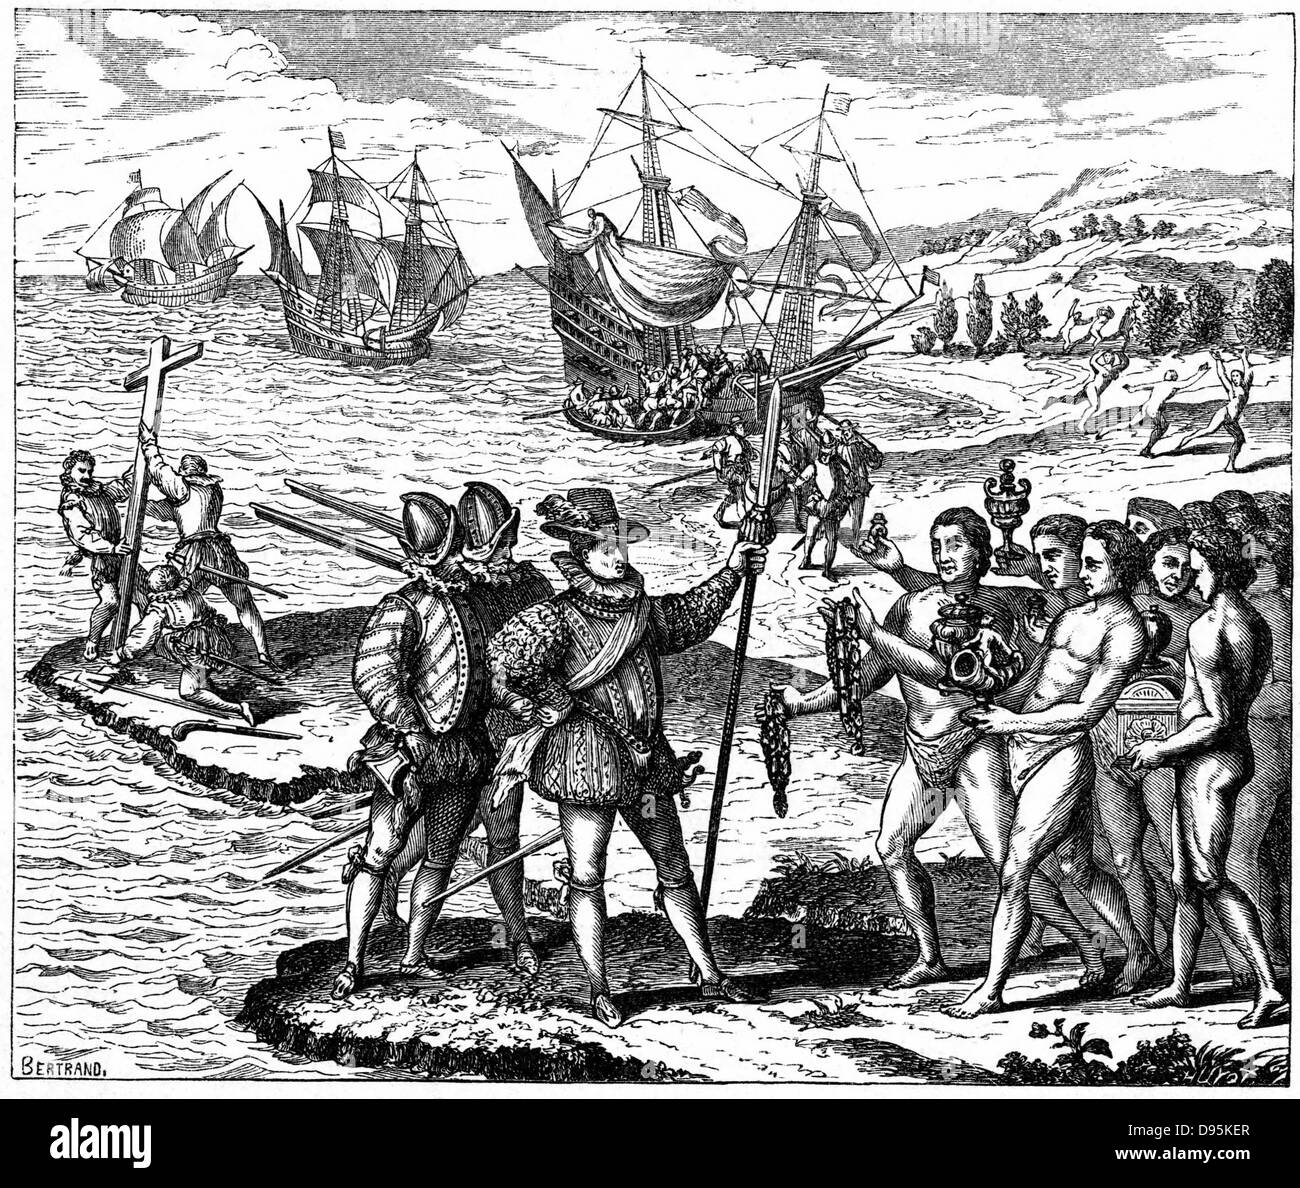 Christopher Columbus (1451-1506) Genoese explorer, discovering America - 12 May 1492. From engraving by Theodore de Bry 1590. Stock Photo